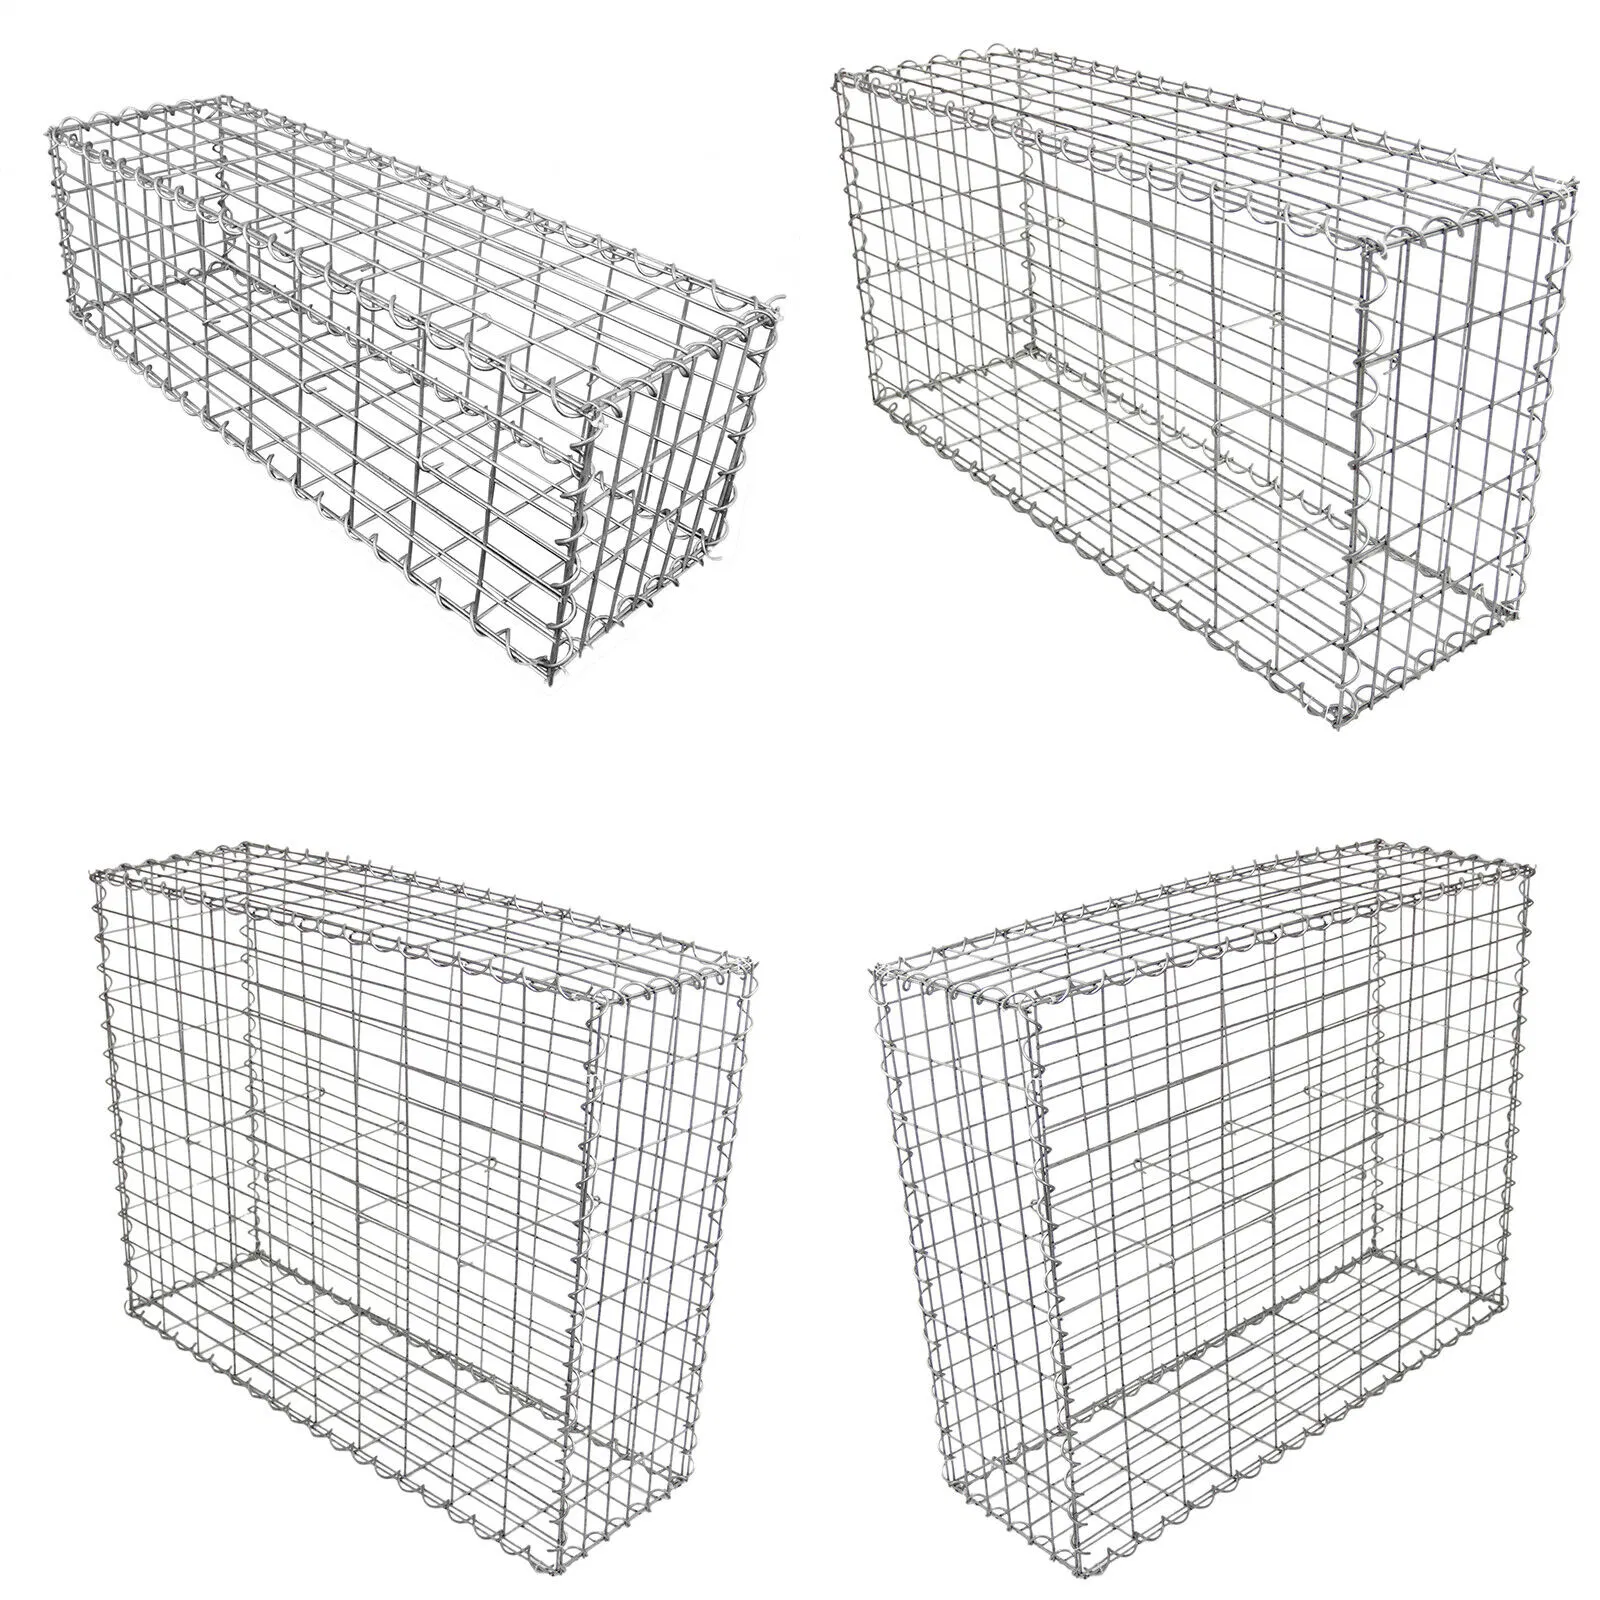 2X1X1m Factory Supply Galvanized Welded Gabion Walls Cabion Stone Cage